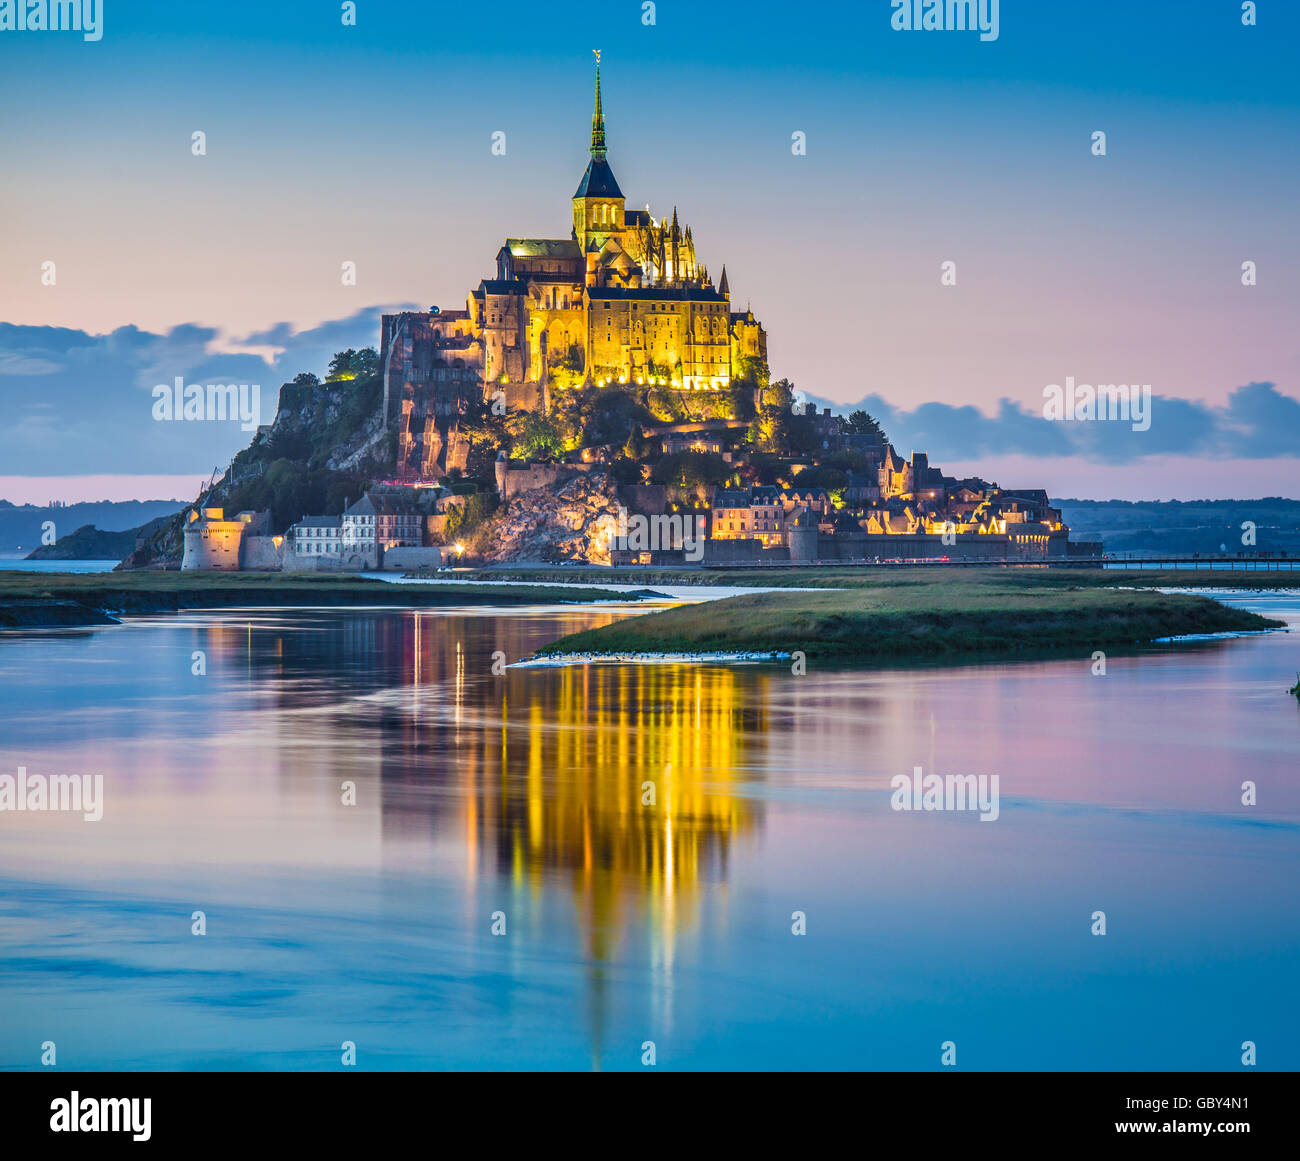 Classic view of famous Le Mont Saint-Michel tidal island in beautiful twilight during blue hour at dusk, Normandy, France Stock Photo